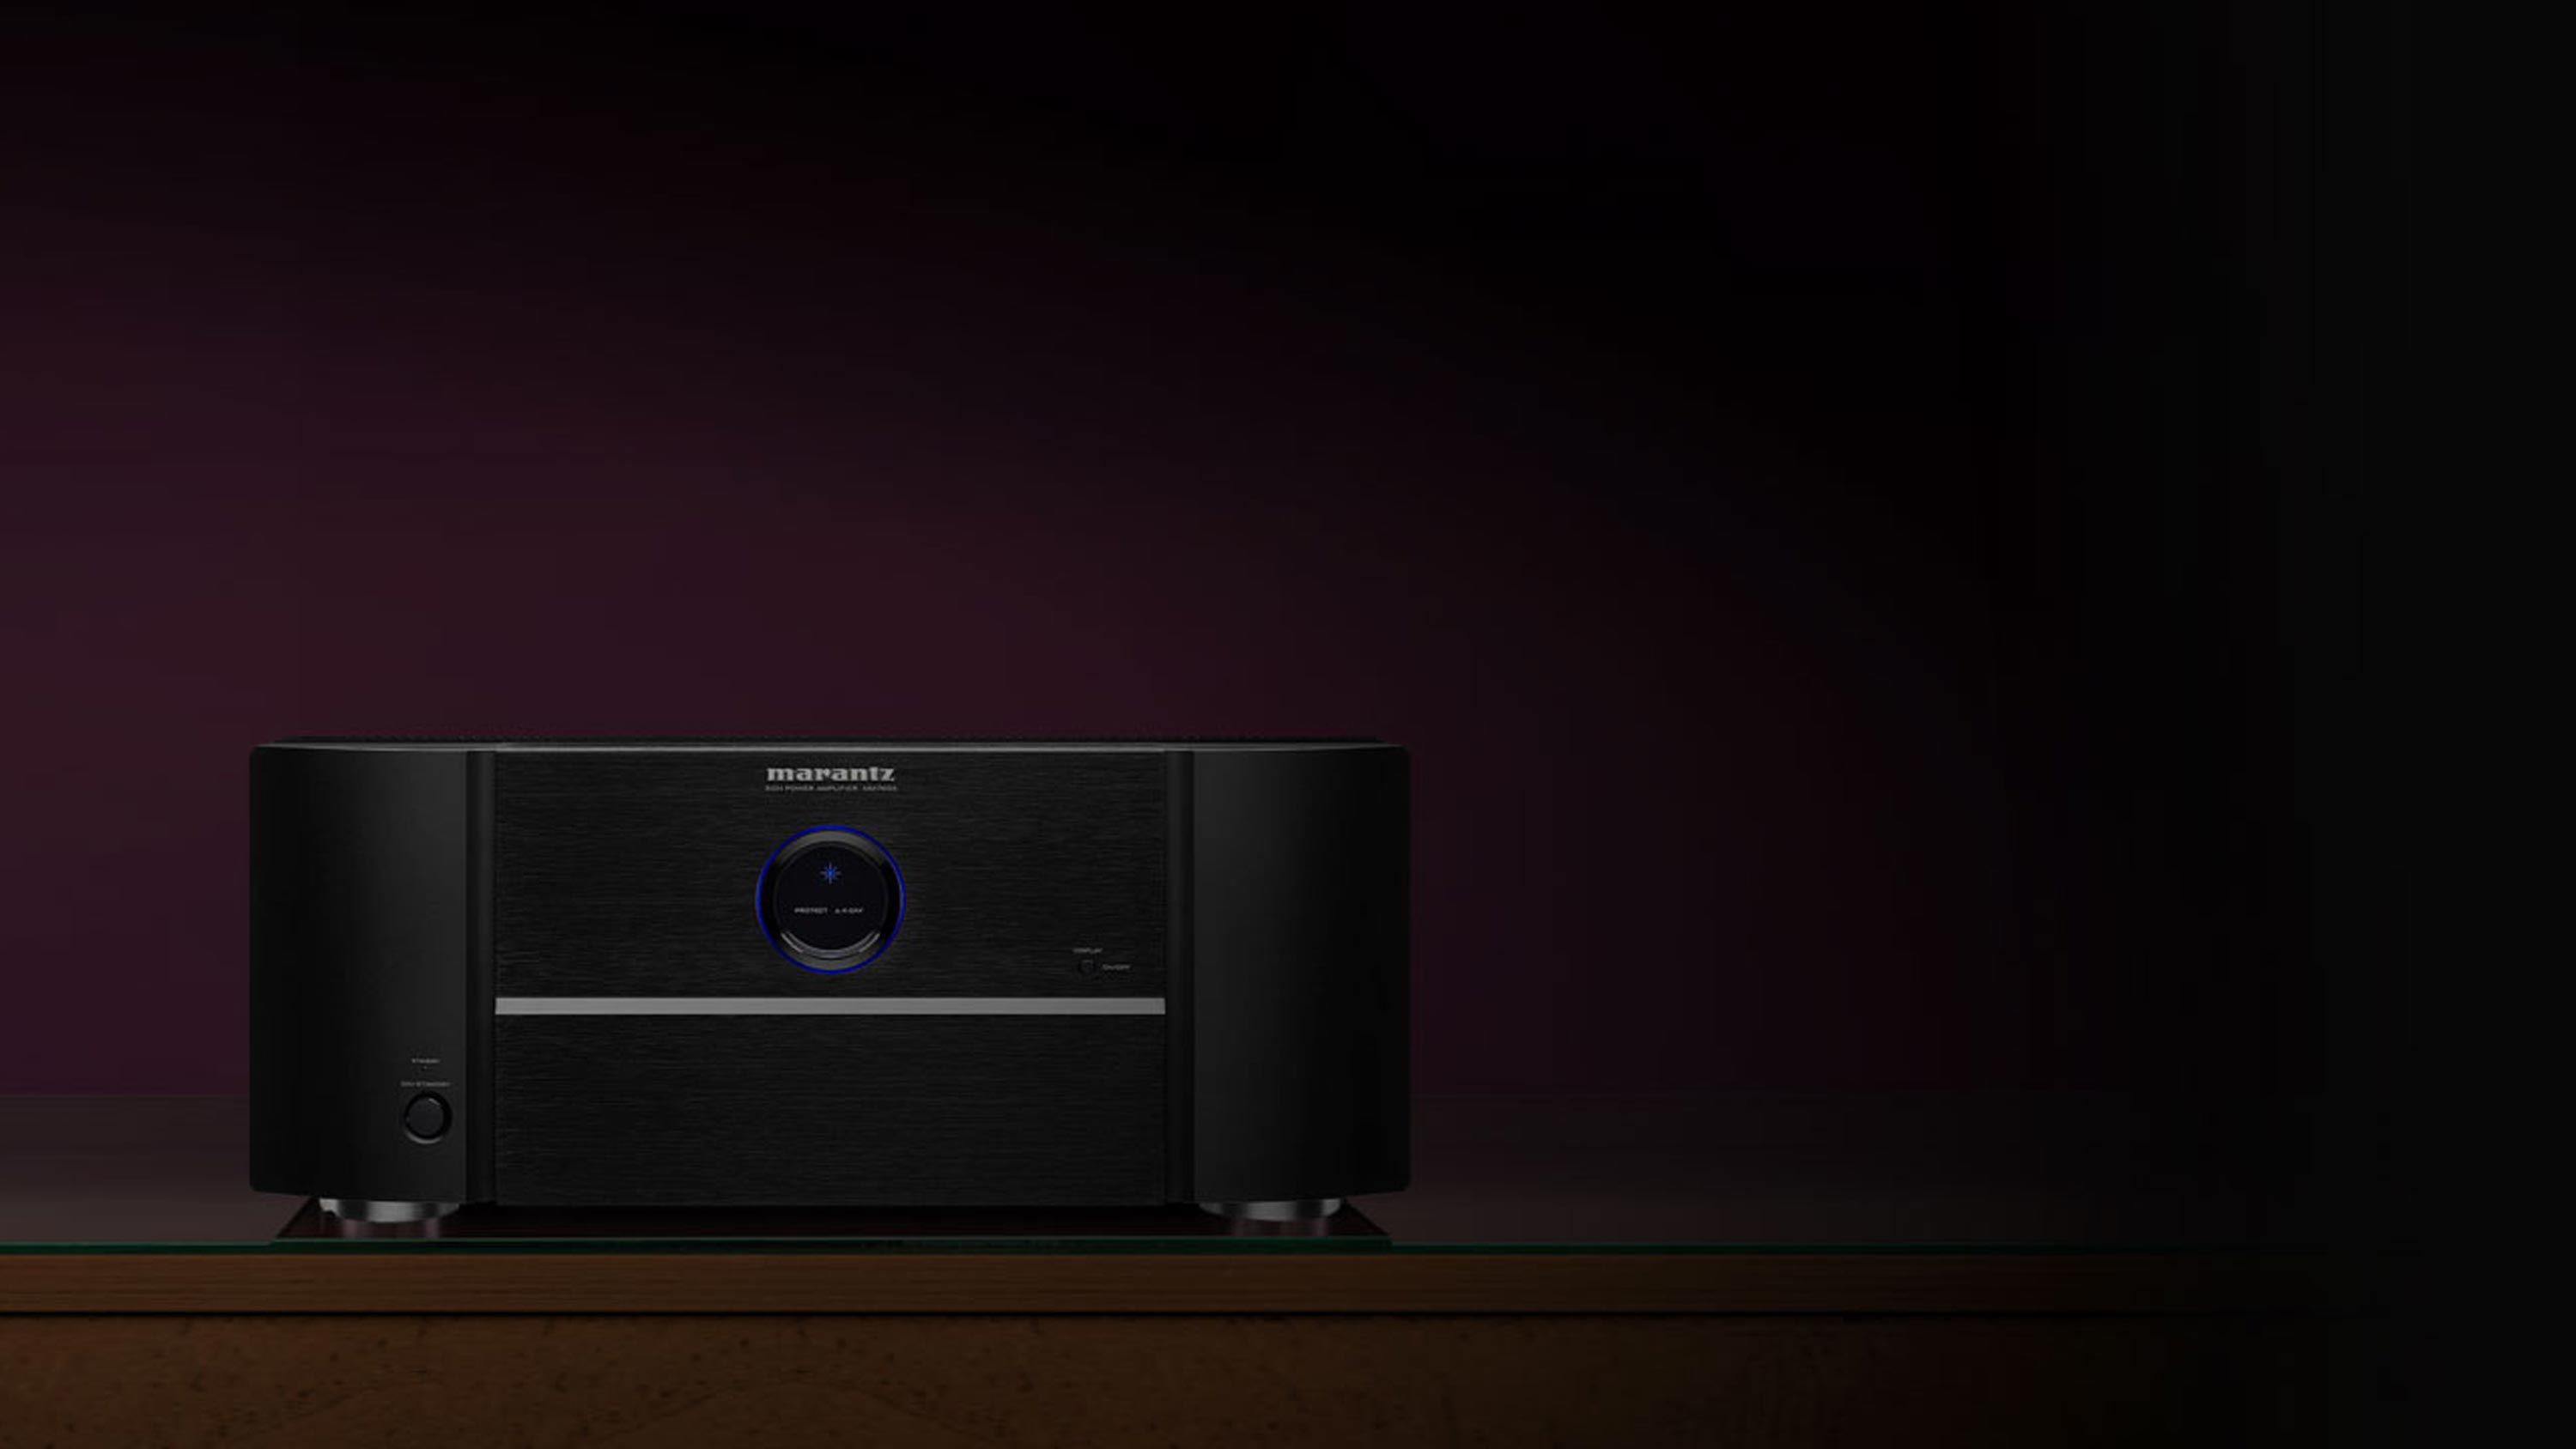 Marantz product on furniture in front of purple wall